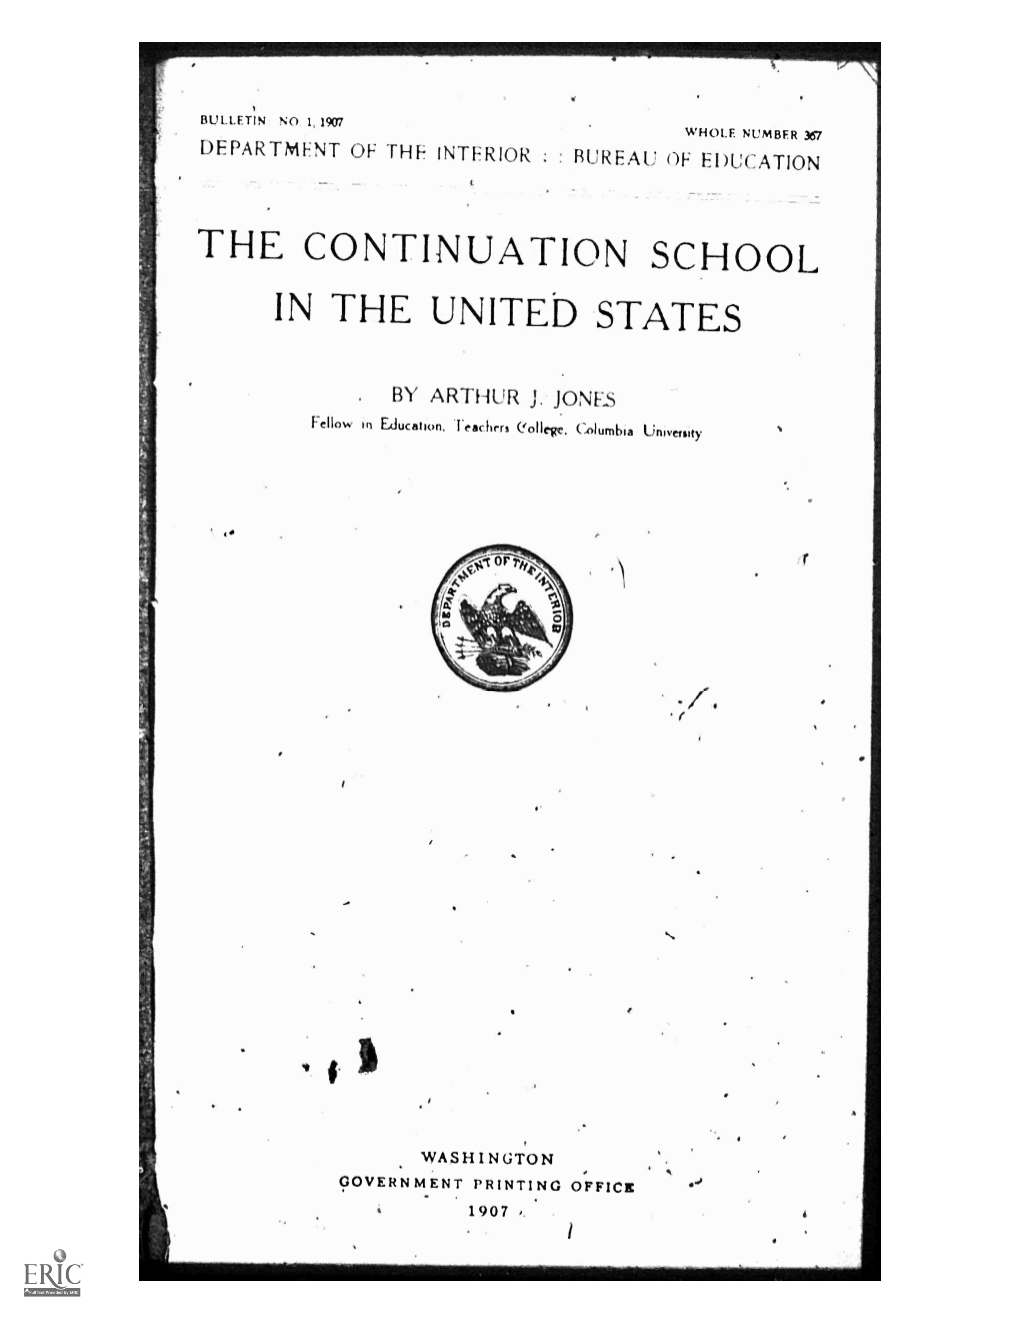 The Continuation Schoolin the United States," by Mr.Arthur D